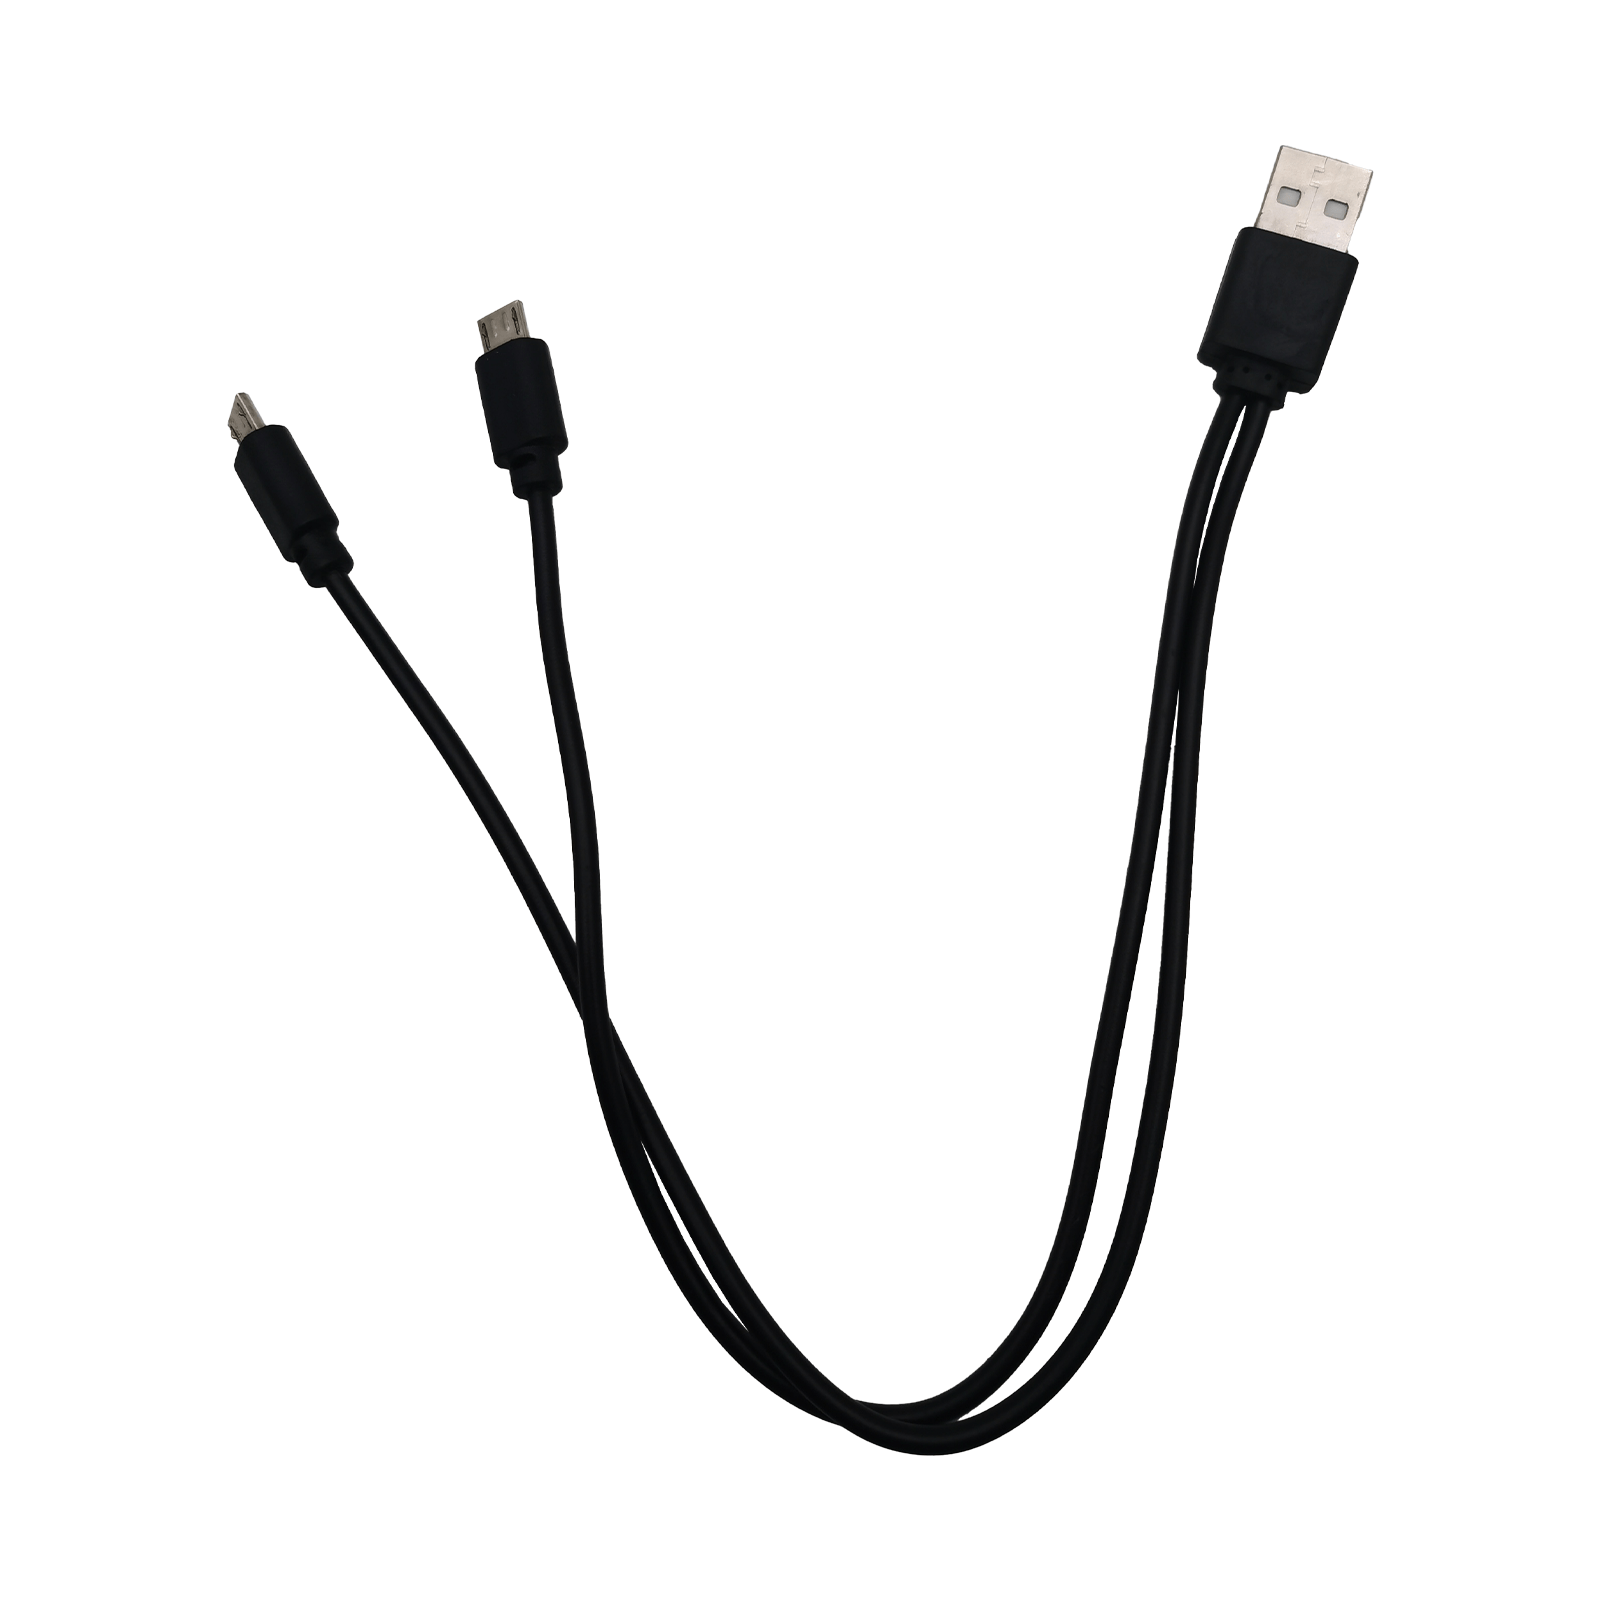 WinBridge 2-in-1 Micro USB Charging Cable for Voice Amplifier S619UHF, M800UHF, S278UHF